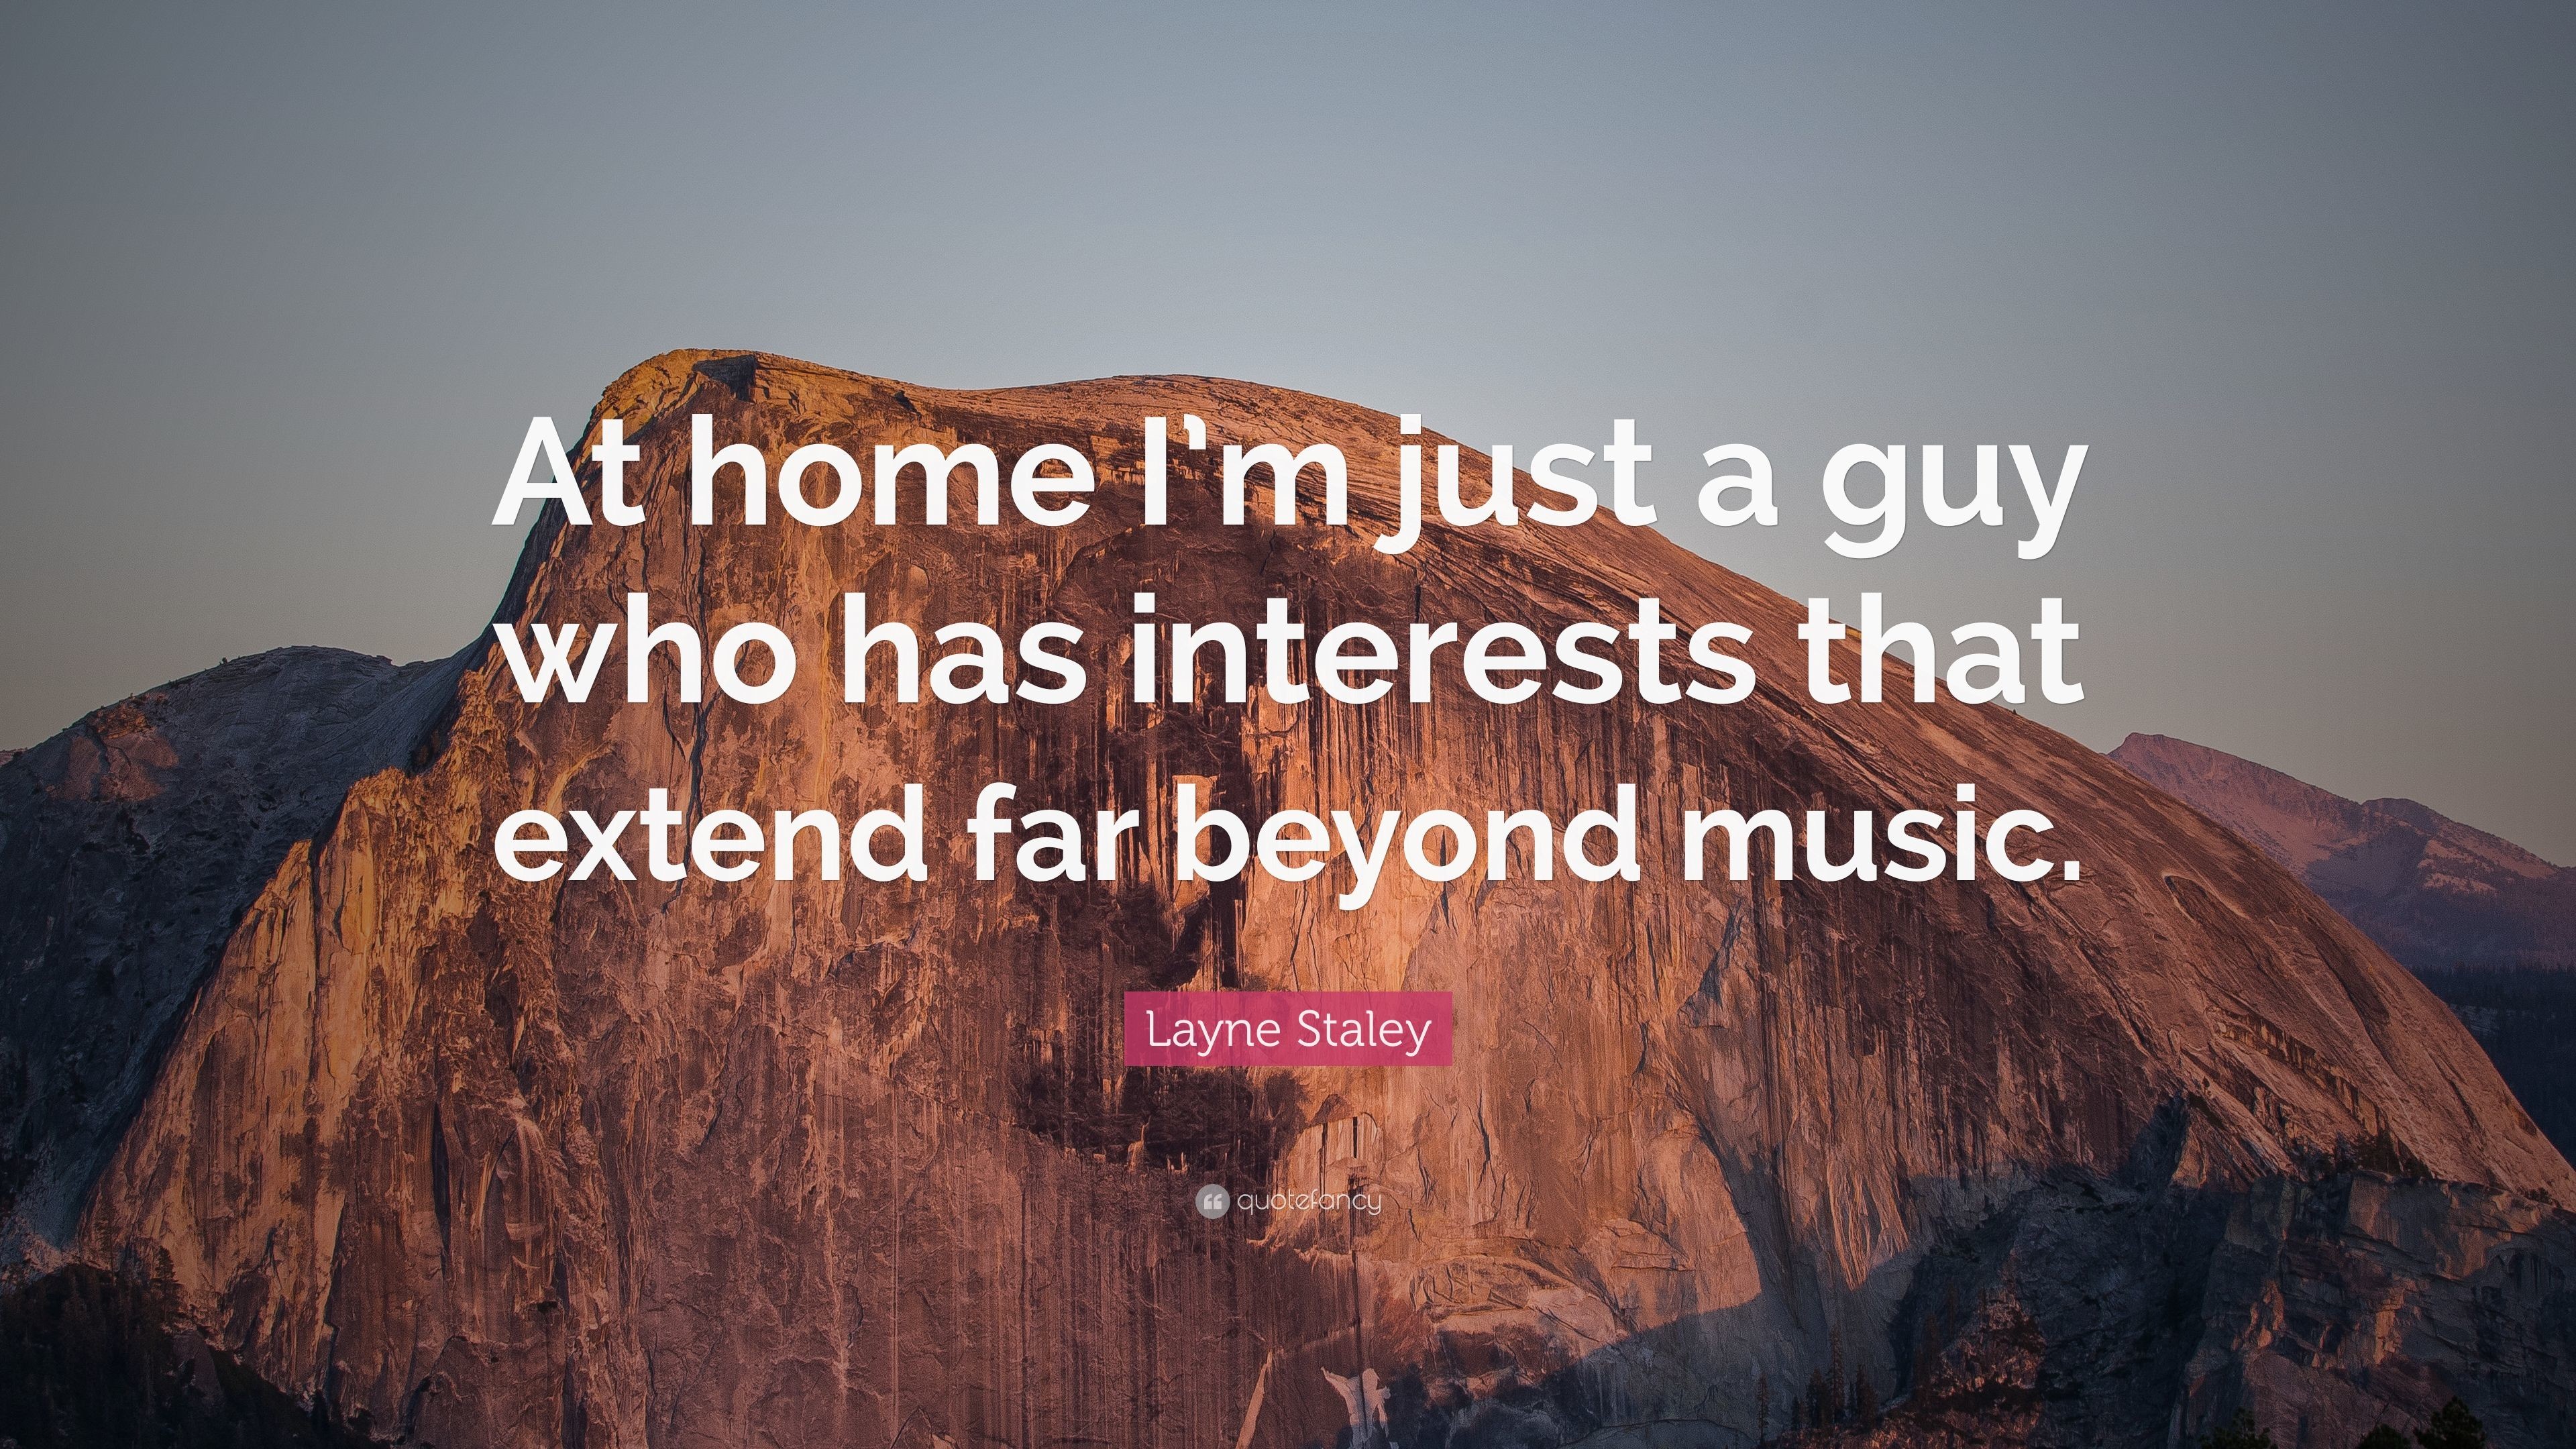 3840x2160 Layne Staley Quote: “At home I'm just a guy who has interests